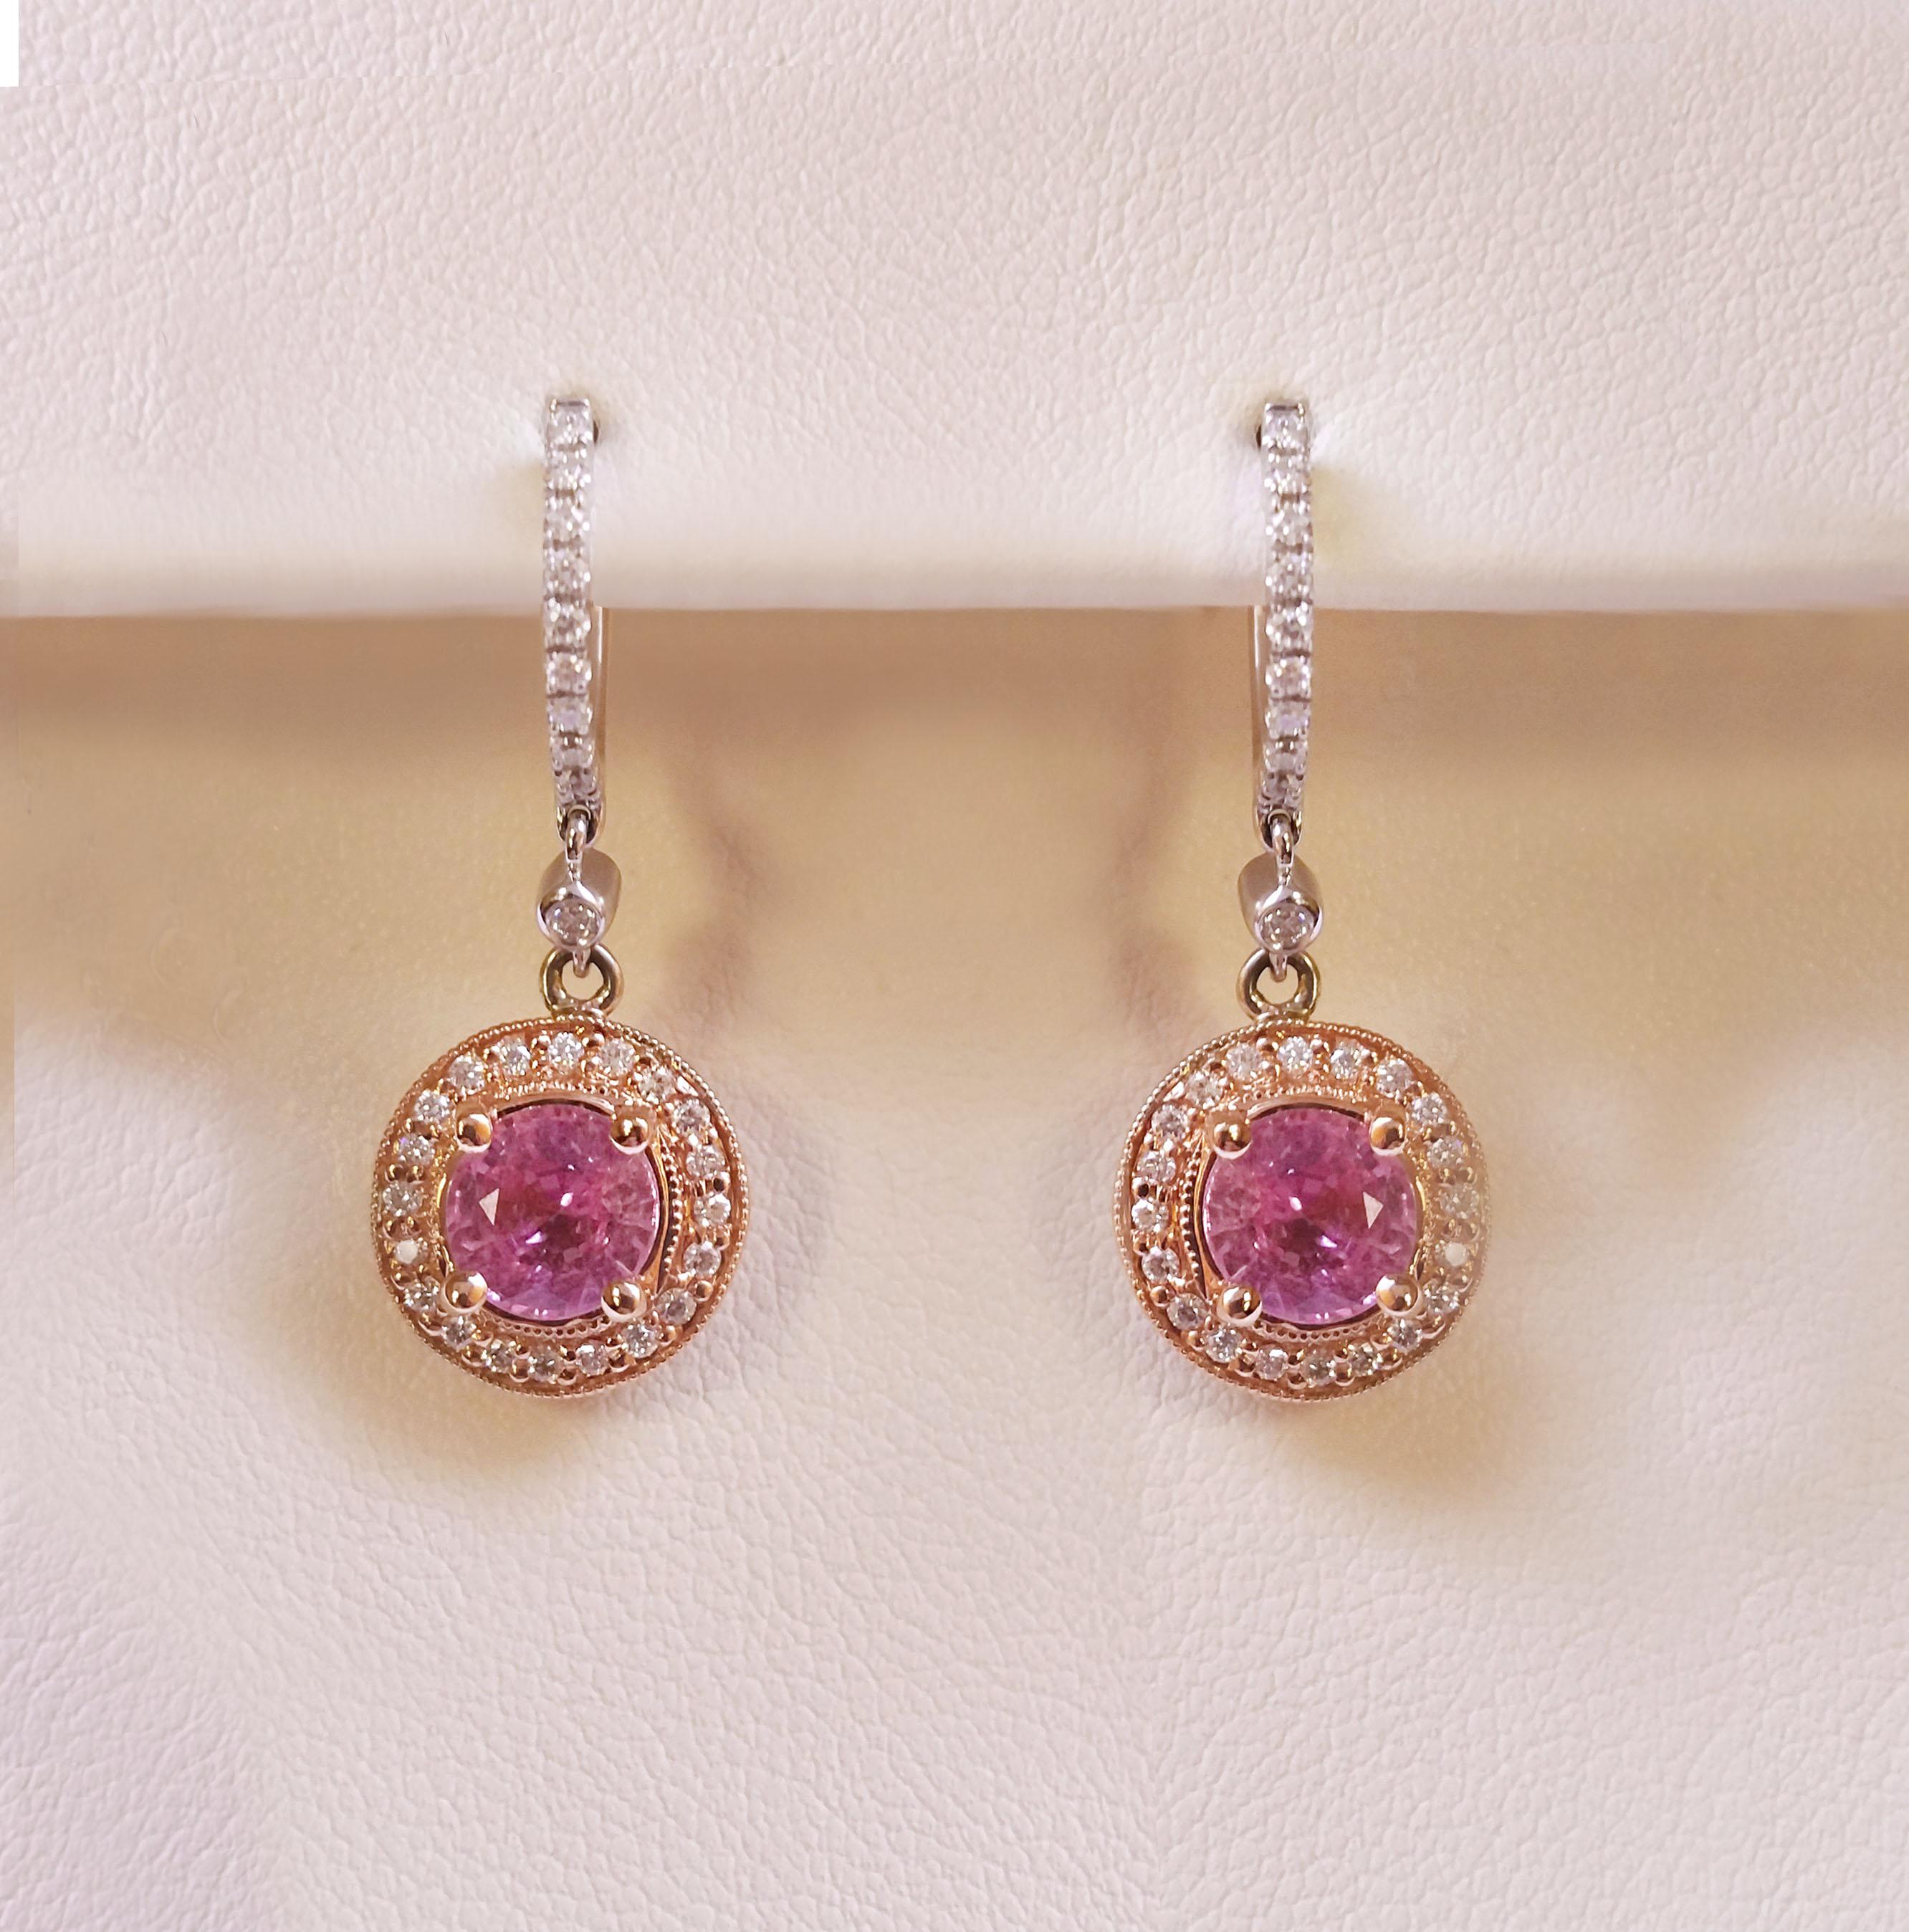 Vitolo 18 Karat Gold Diamond Drop Earrings with Pink Sapphire In New Condition For Sale In Los Angeles, CA